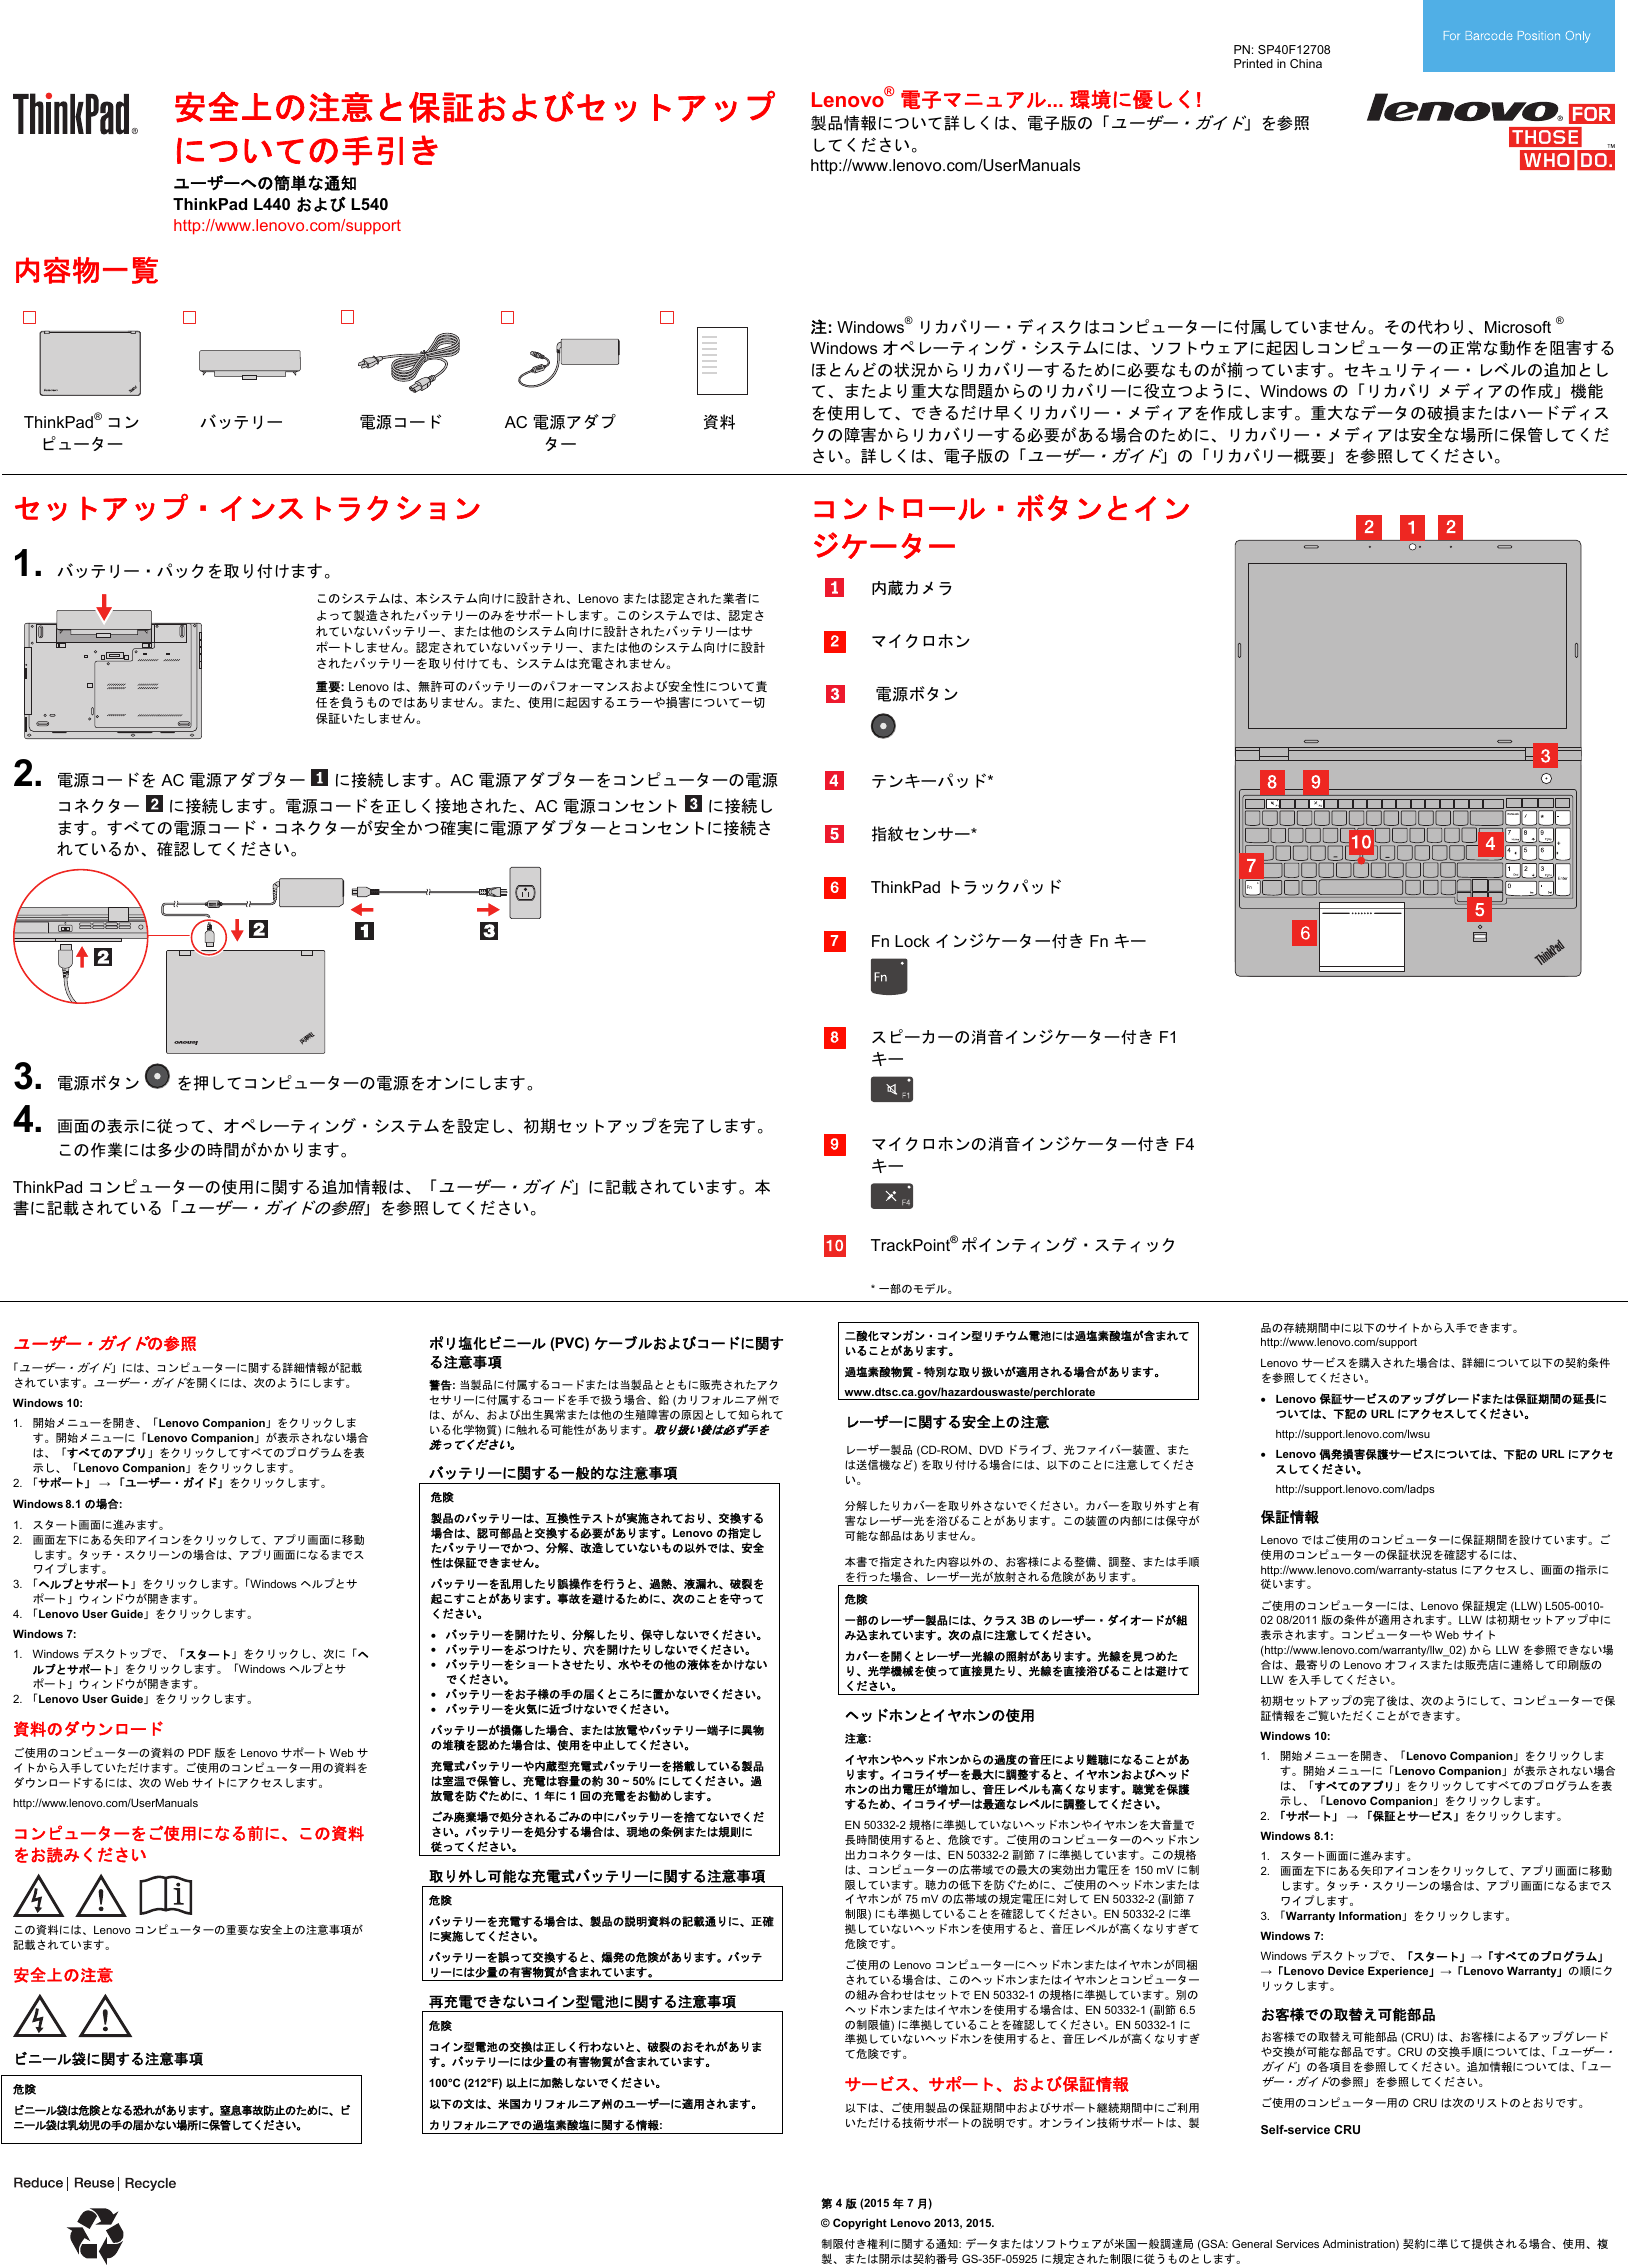 Lenovo L440 L540 Swsg Ja Sp40f And L540 Offspring Prodigy User Manual 安全上の注意と保証およびセットアップ についての手引き Think Pad L440 Laptop Think Pad Type at